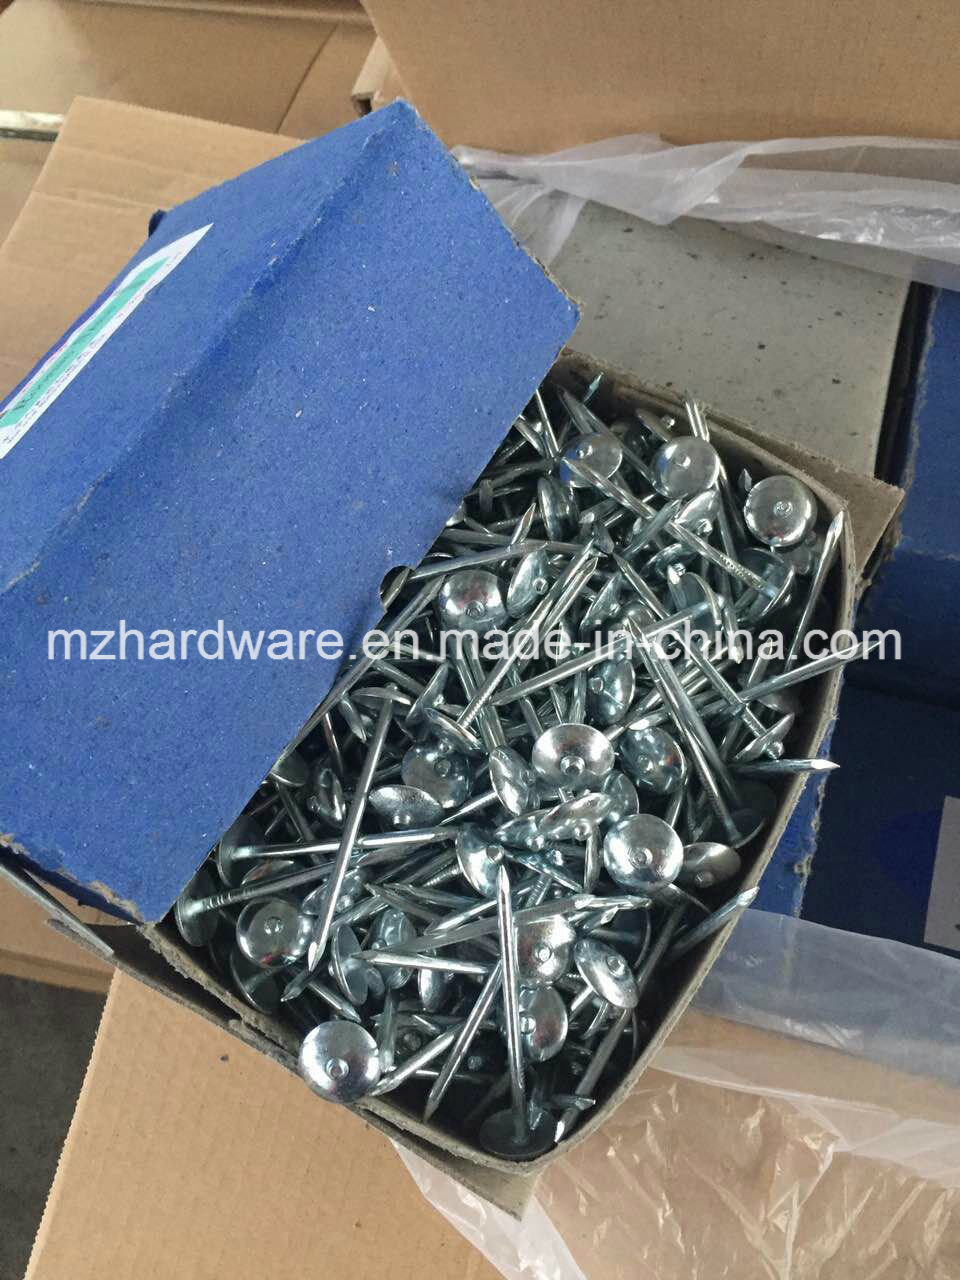 Umbrella Head Plain Twist Shank Roofing Nails with High Quality